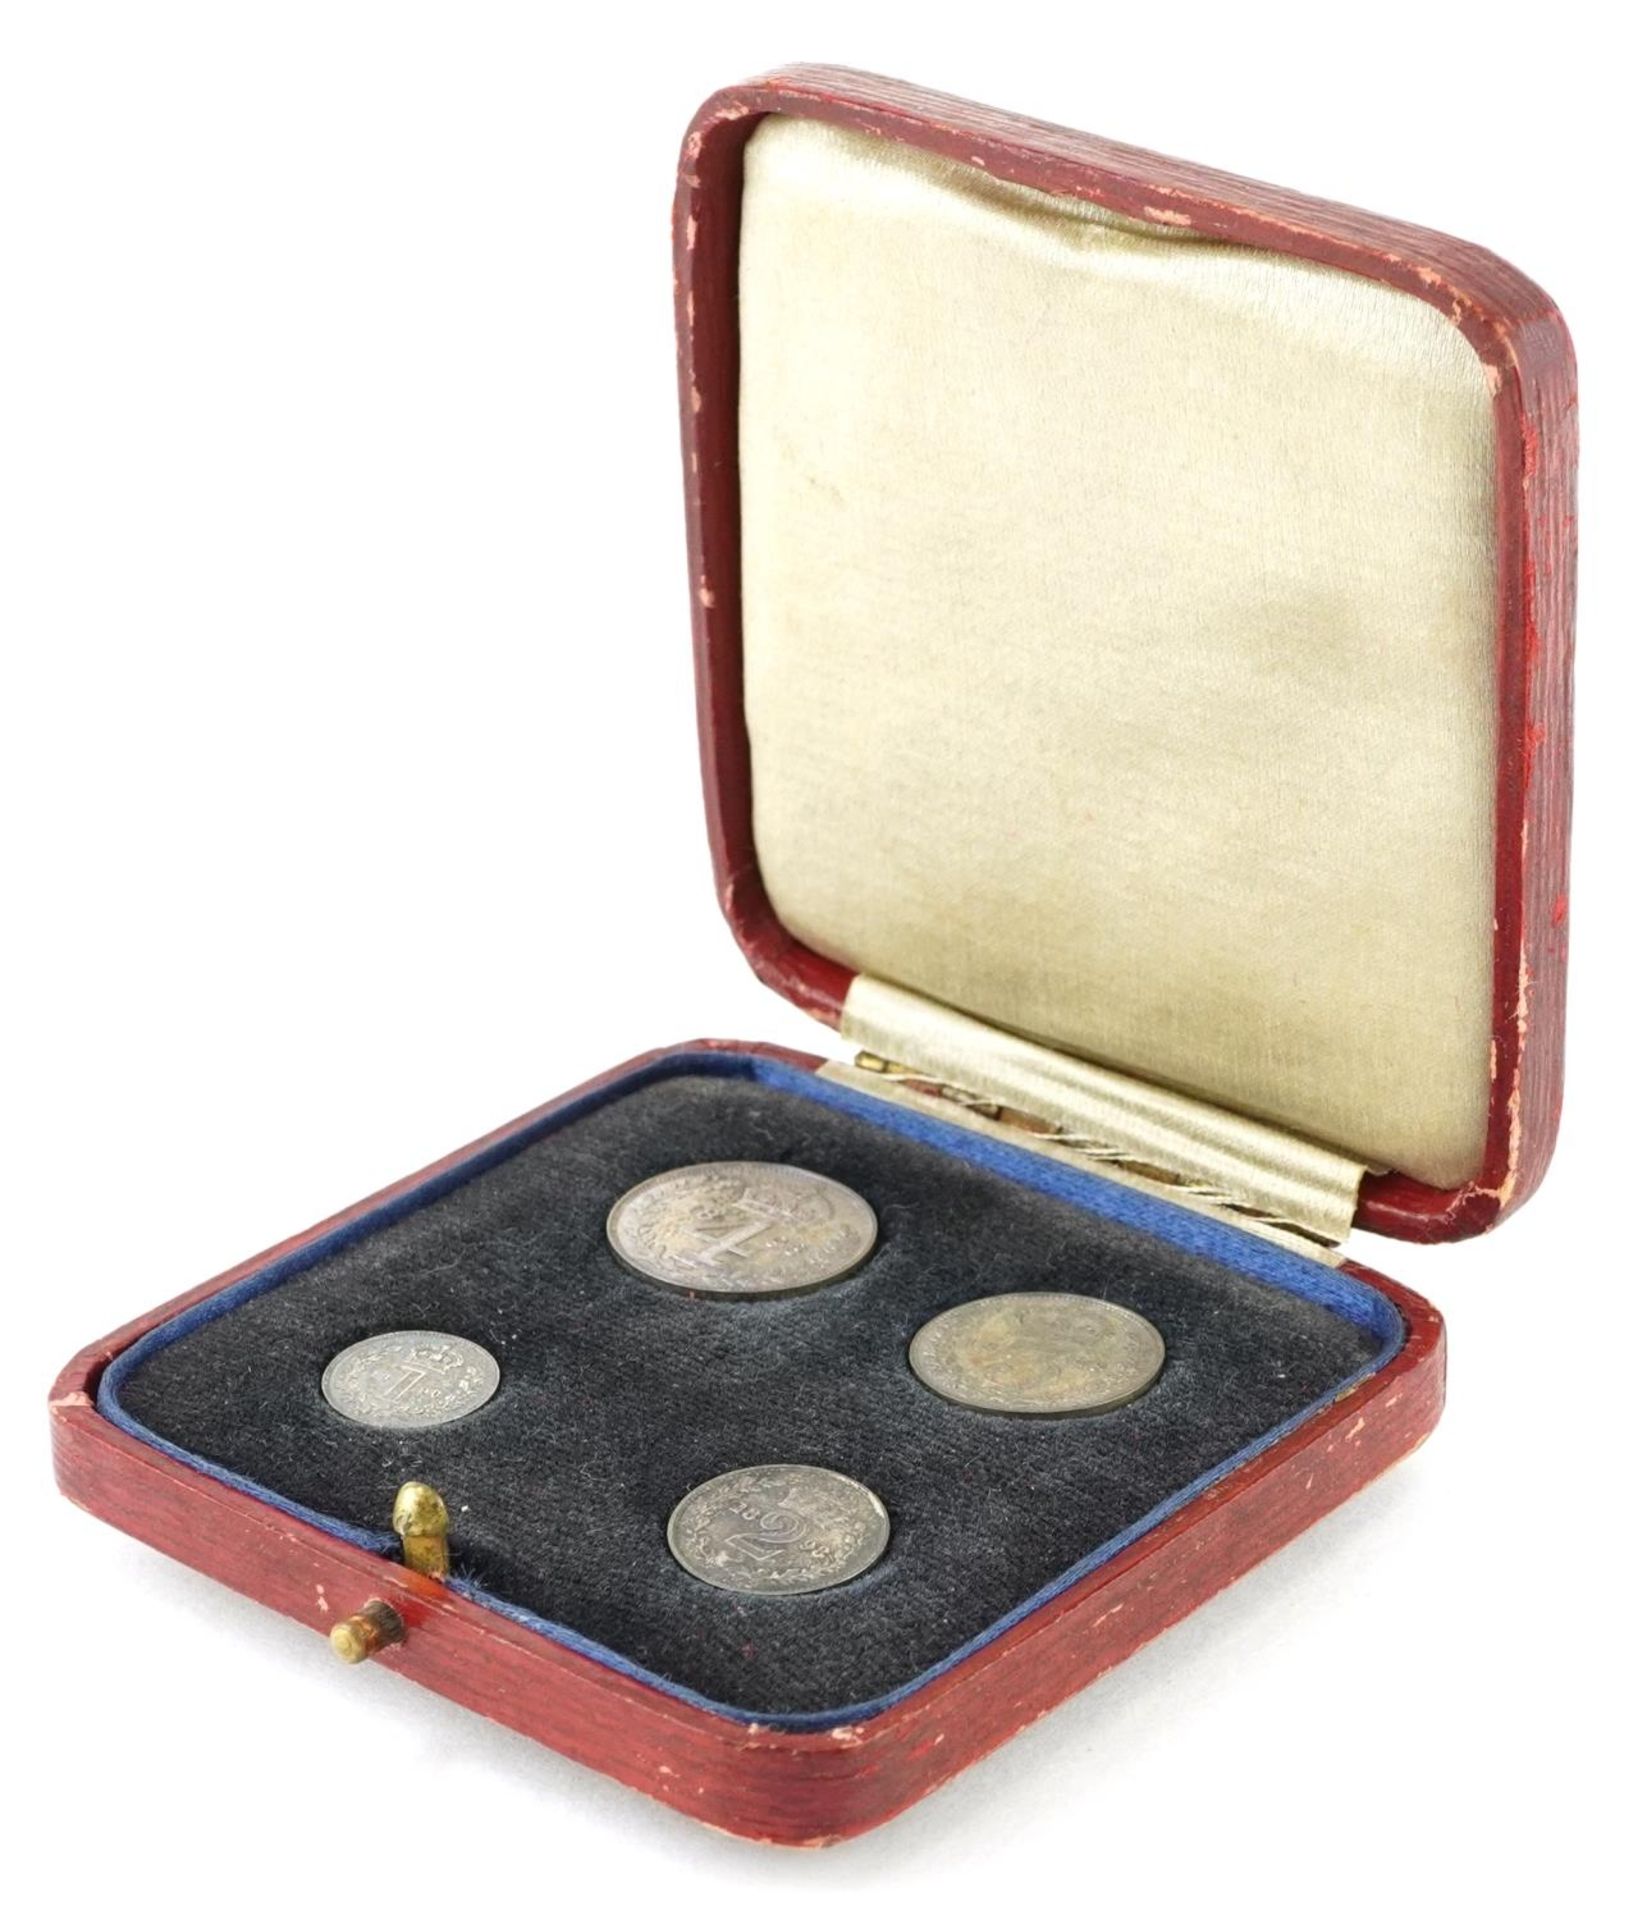 Queen Victoria 1898 Maundy coin set housed in a silk and velvet lined fitted case : For further